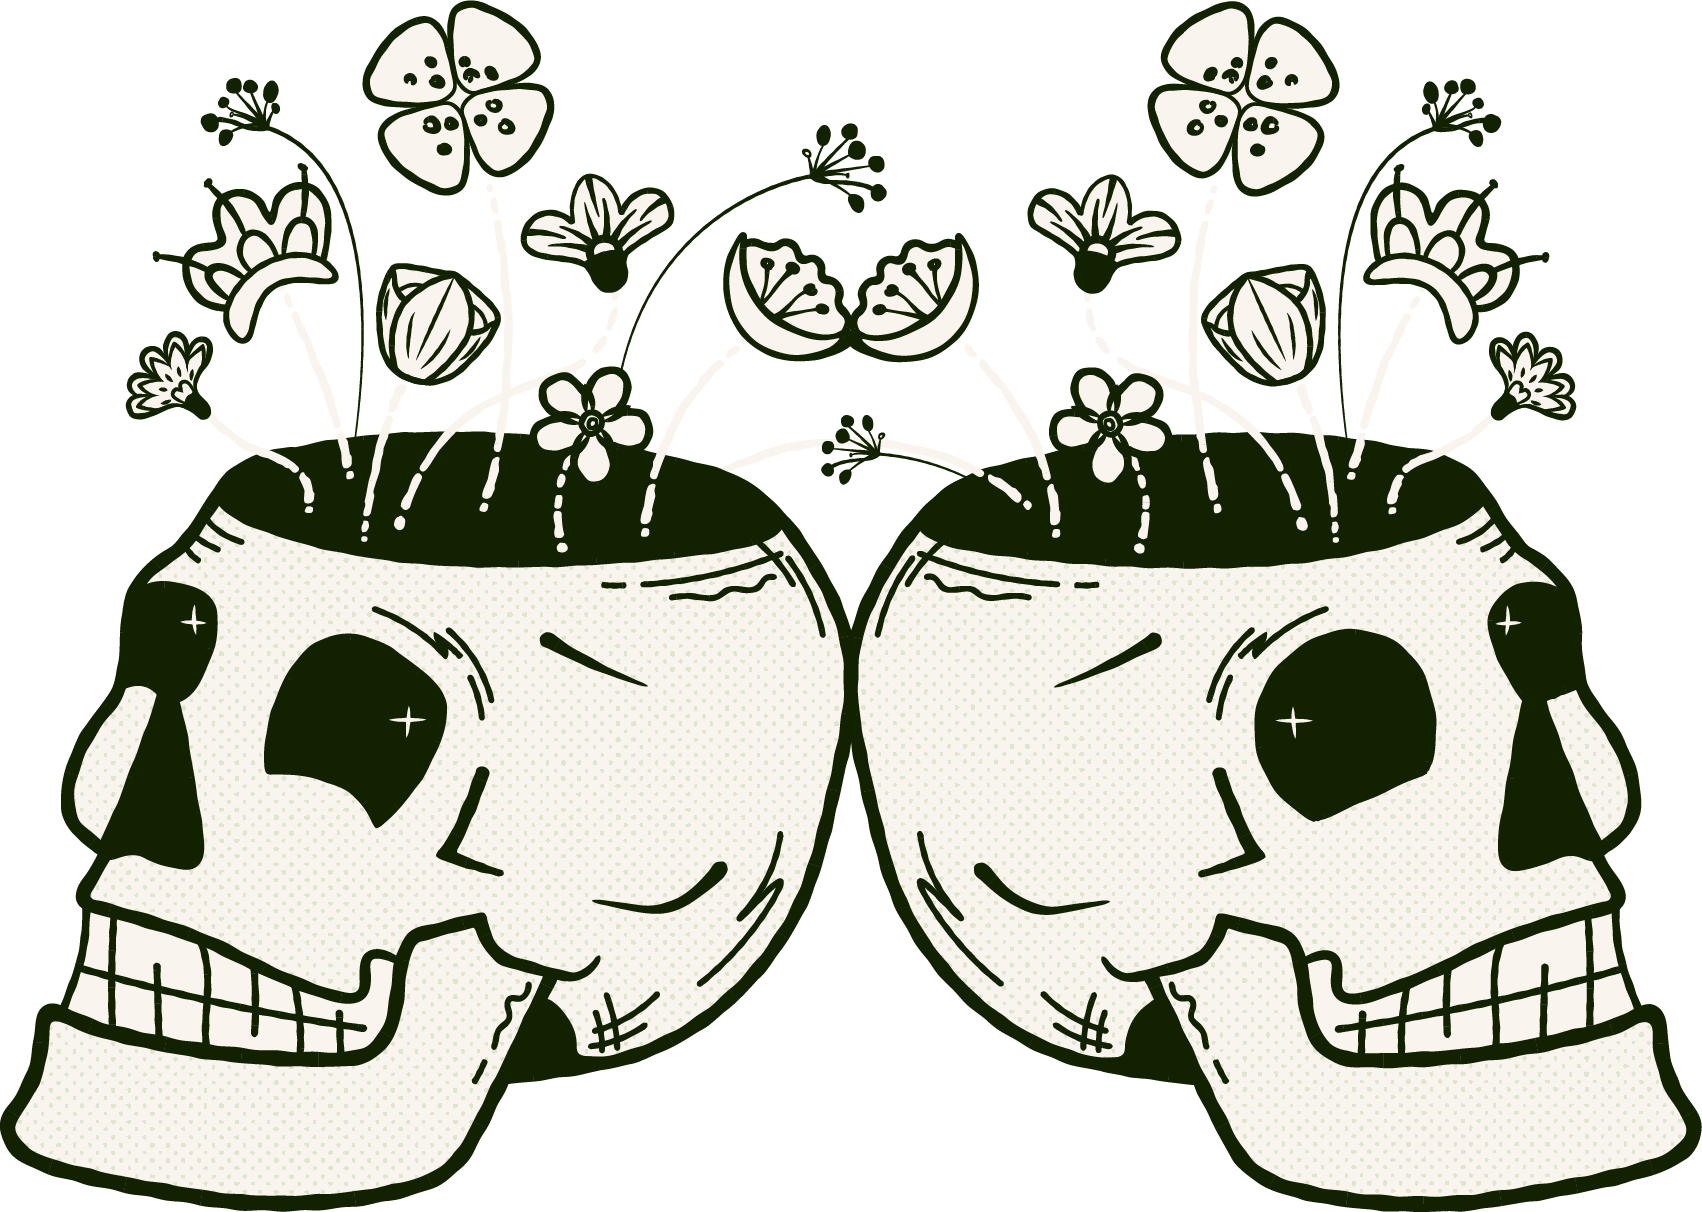 illustrated retro cartoon skulls with top removed and retro stylised flowers growing. warm off-white with a heavy dark green outline, illustrated cross-hatchings and line marks, and a half tone finish.